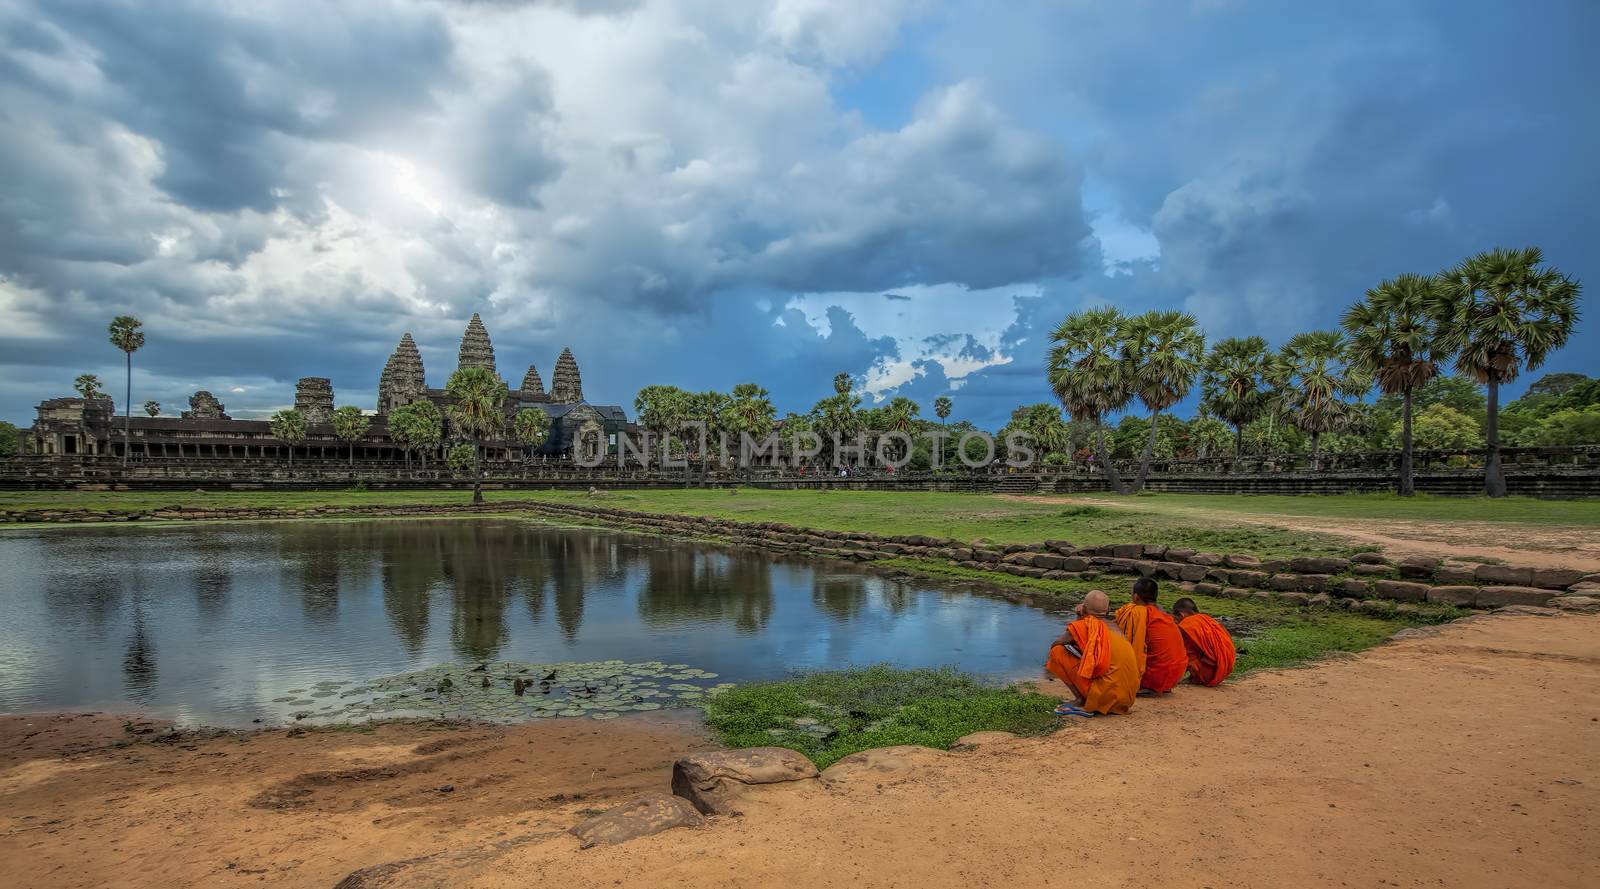 Monks watching the sunset over Angkor Wat from the lake